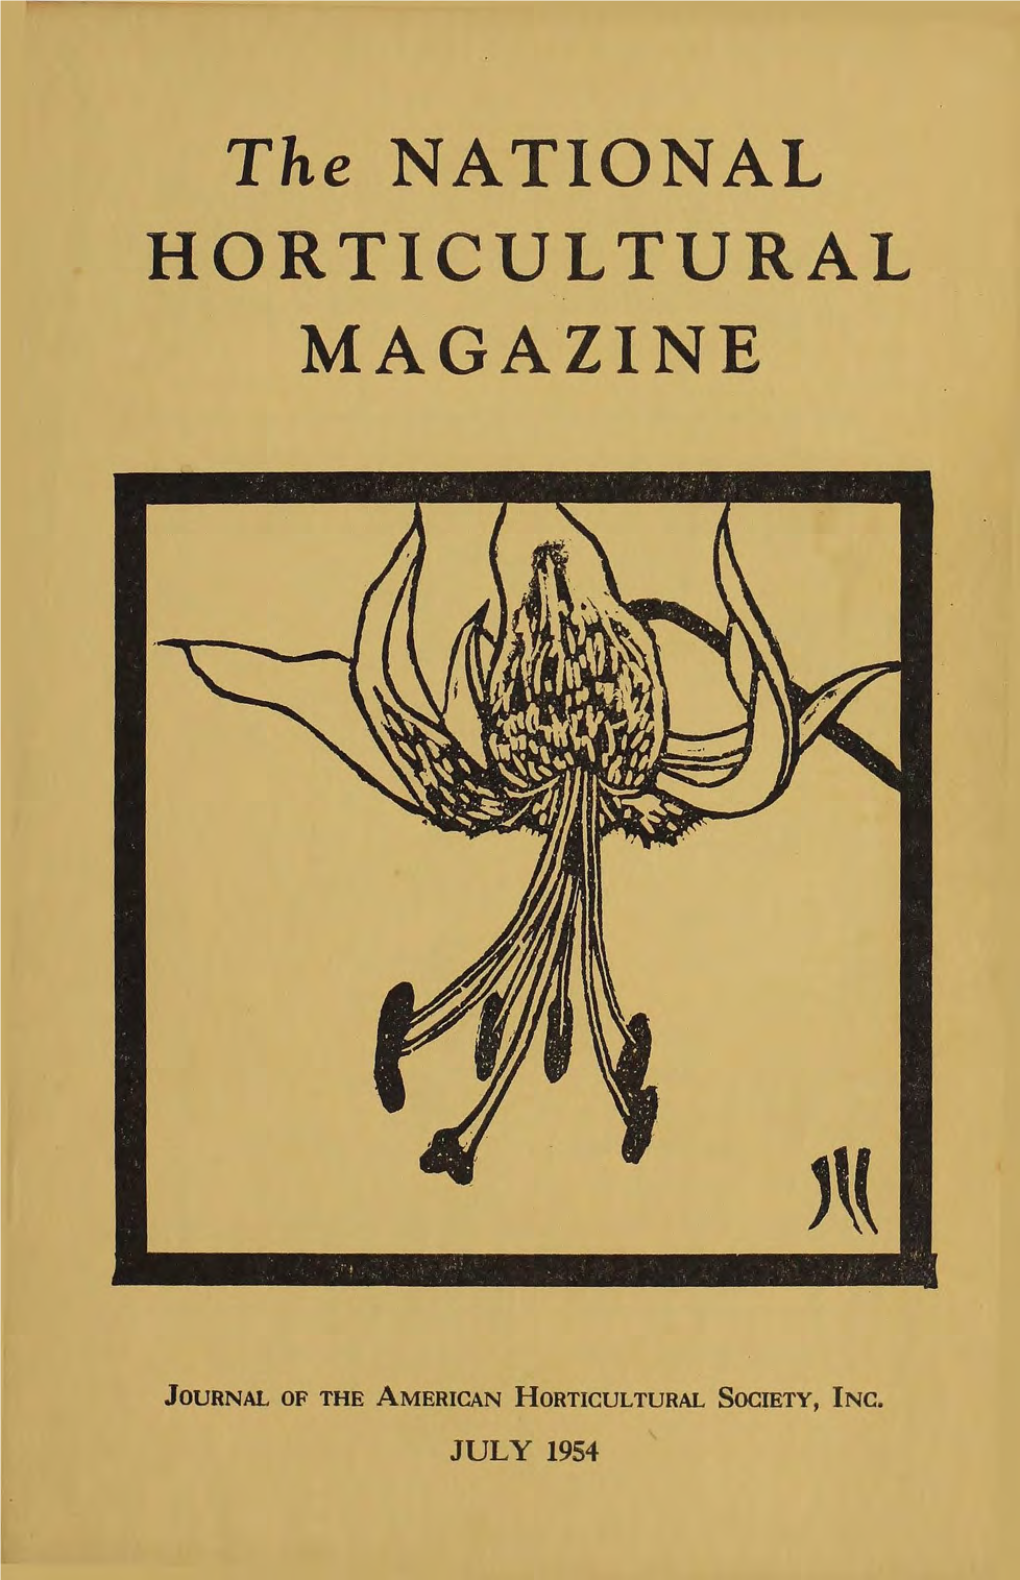 July 1954 the American Horticultural Society, Inc